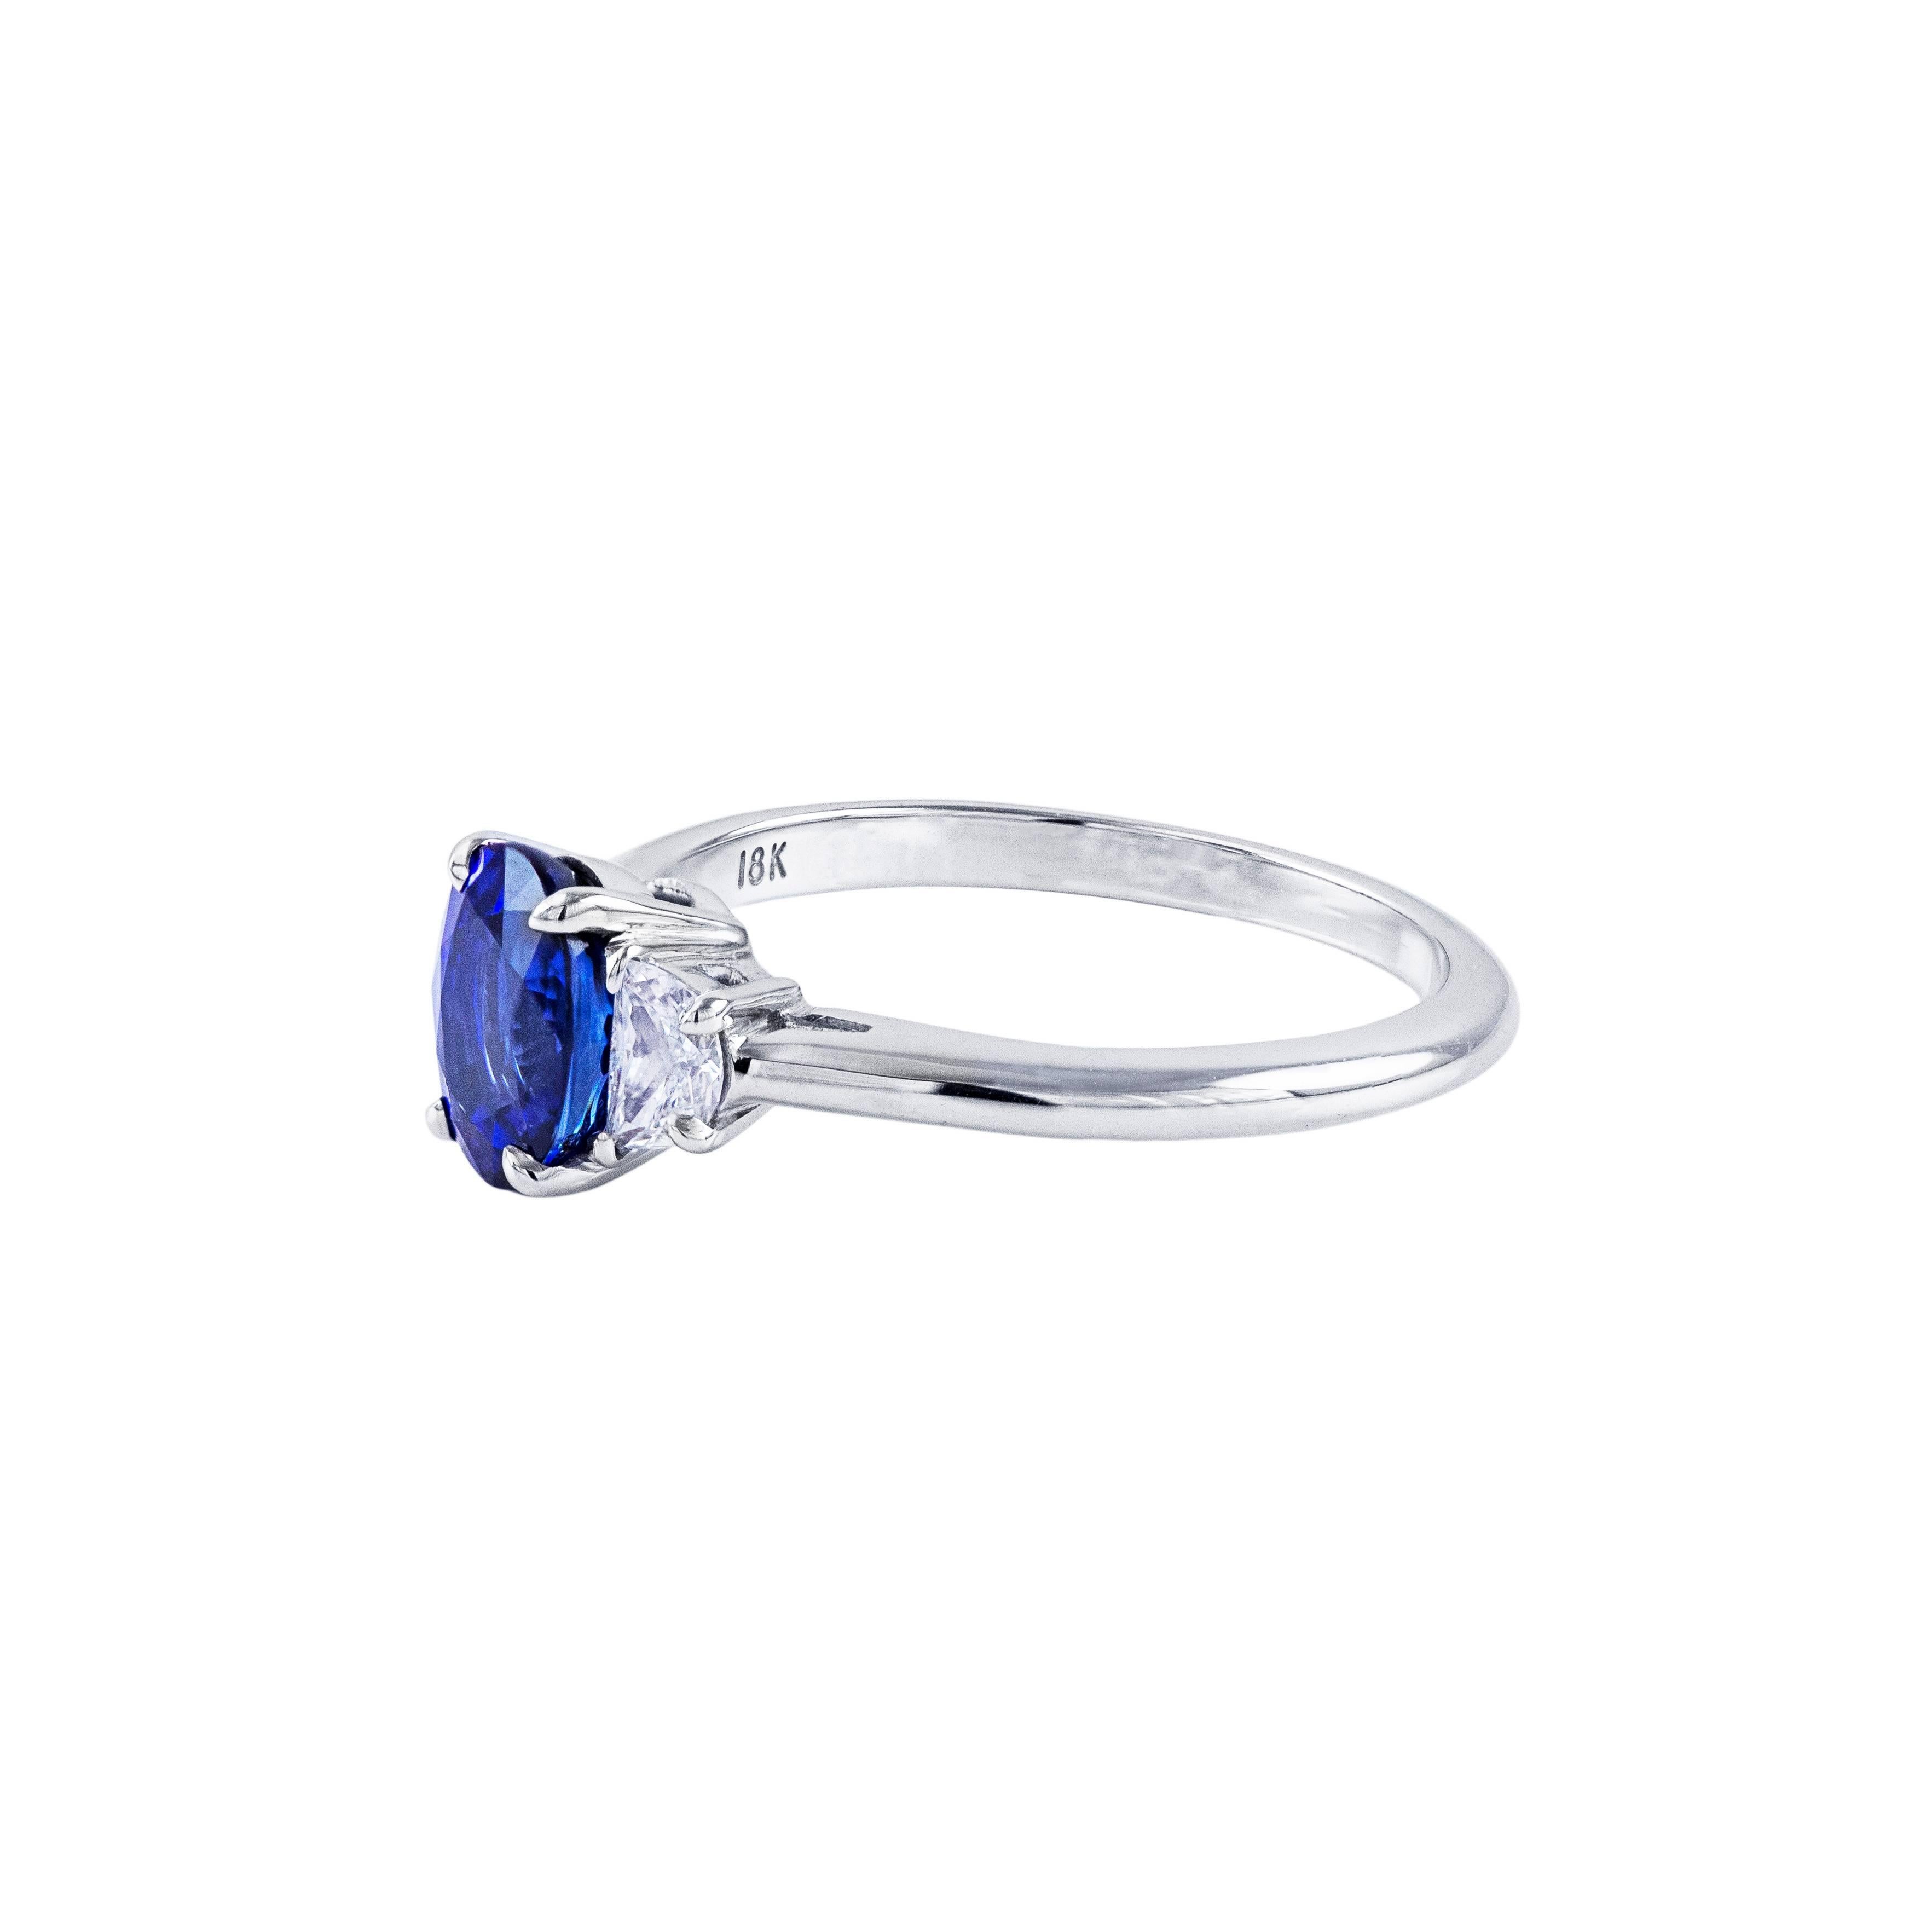 This ring features a 1.33 carat sapphire center stone. The sapphire has a beautiful deep blue color and is eye clean. The sapphire is accented by 2 half moon cut diamonds weighing 0.24 carats total. Made in 18k white gold. Size 6 (sizable). 

Style